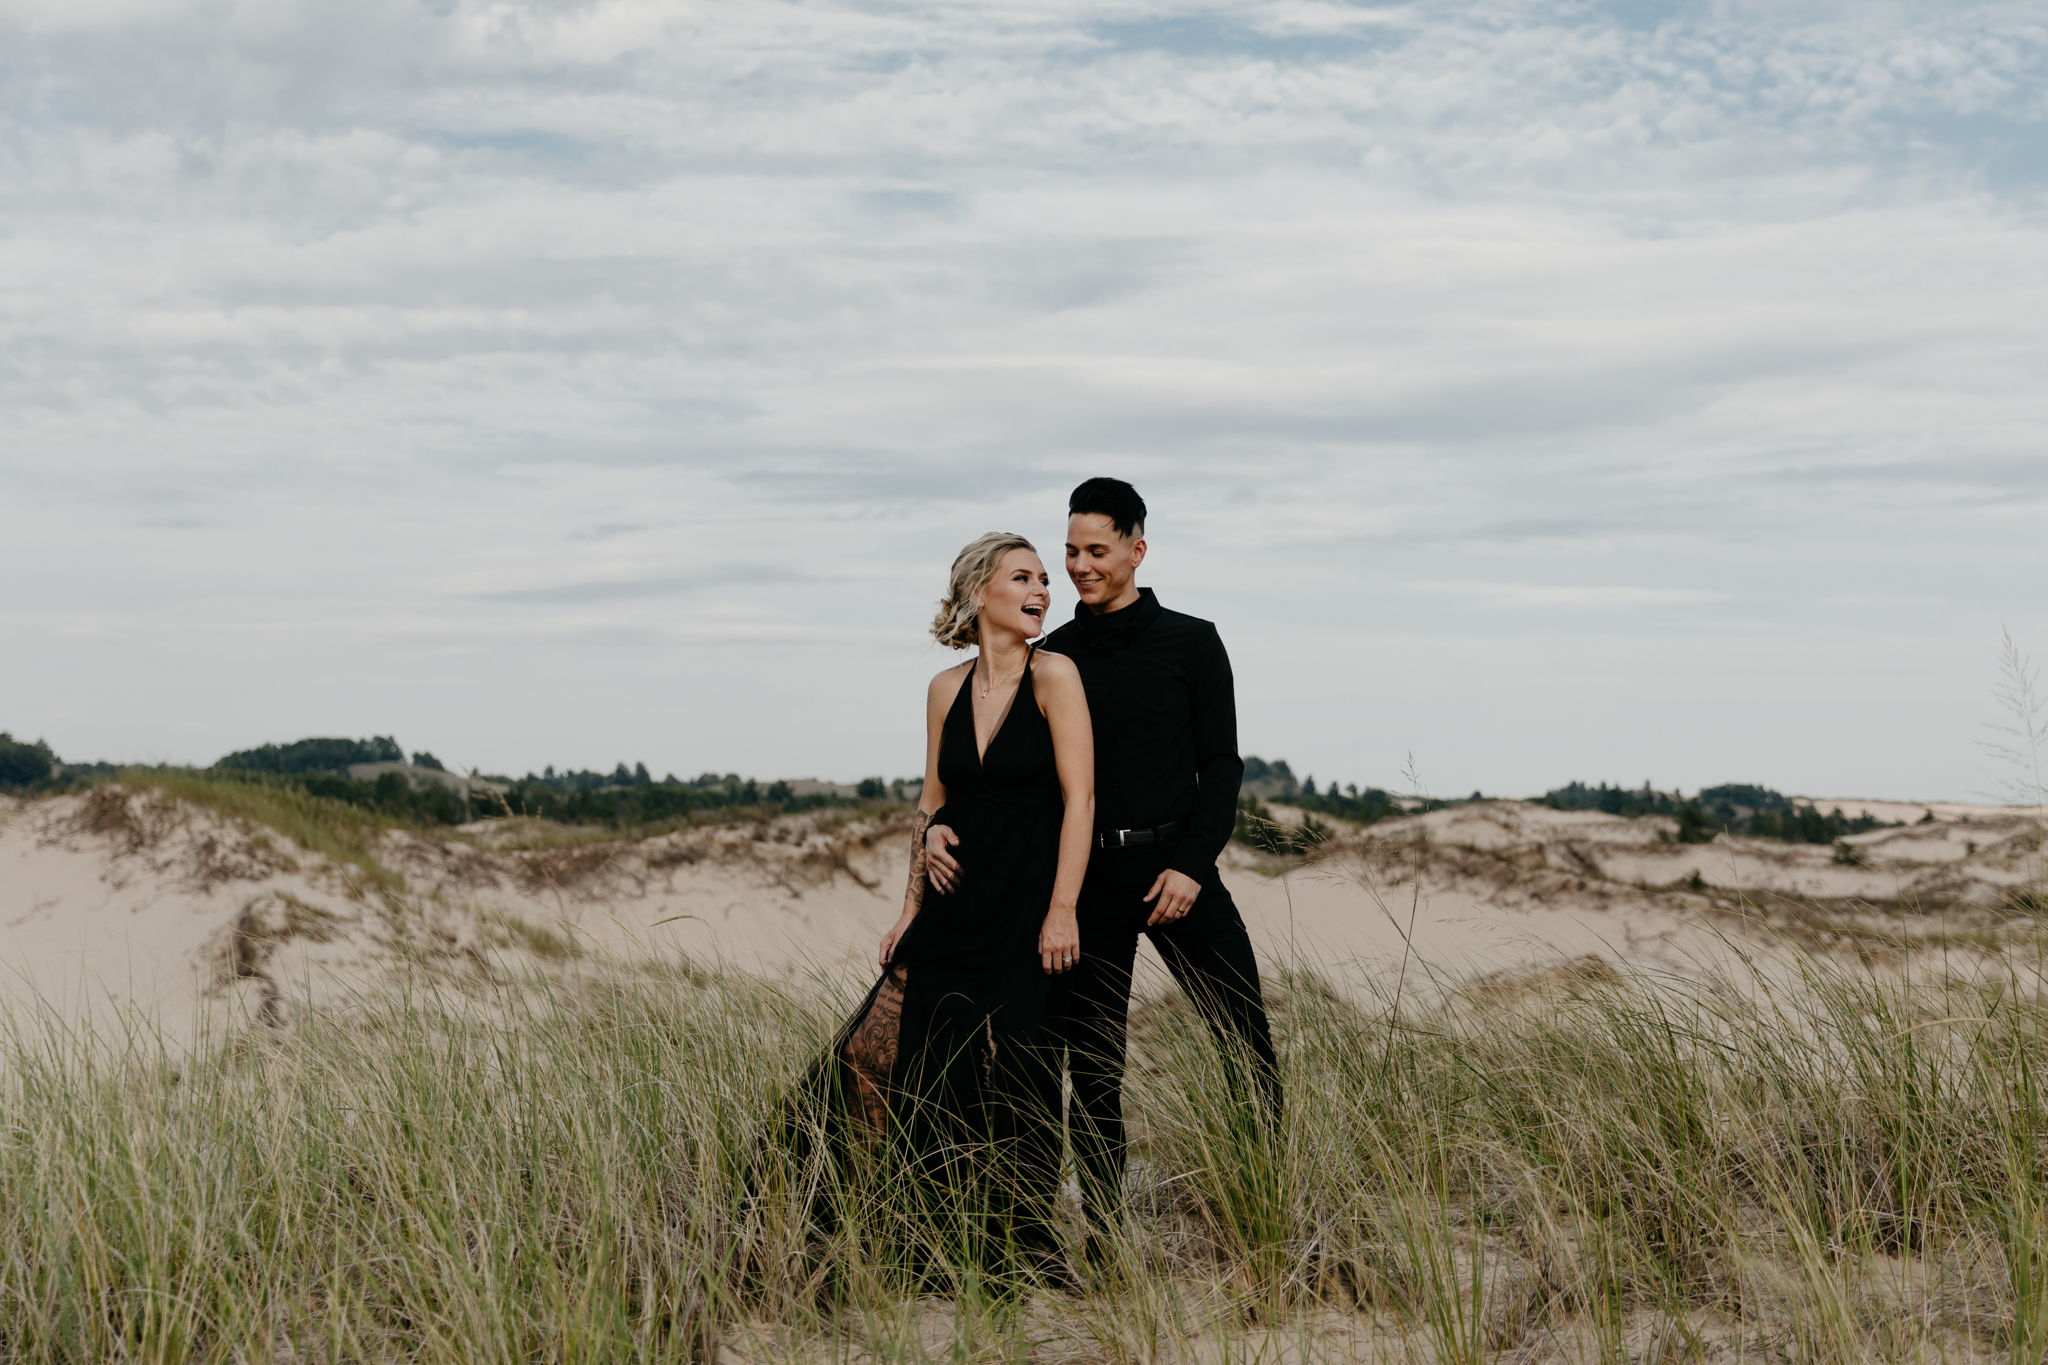 How to Decide if an Elopement is Right for You